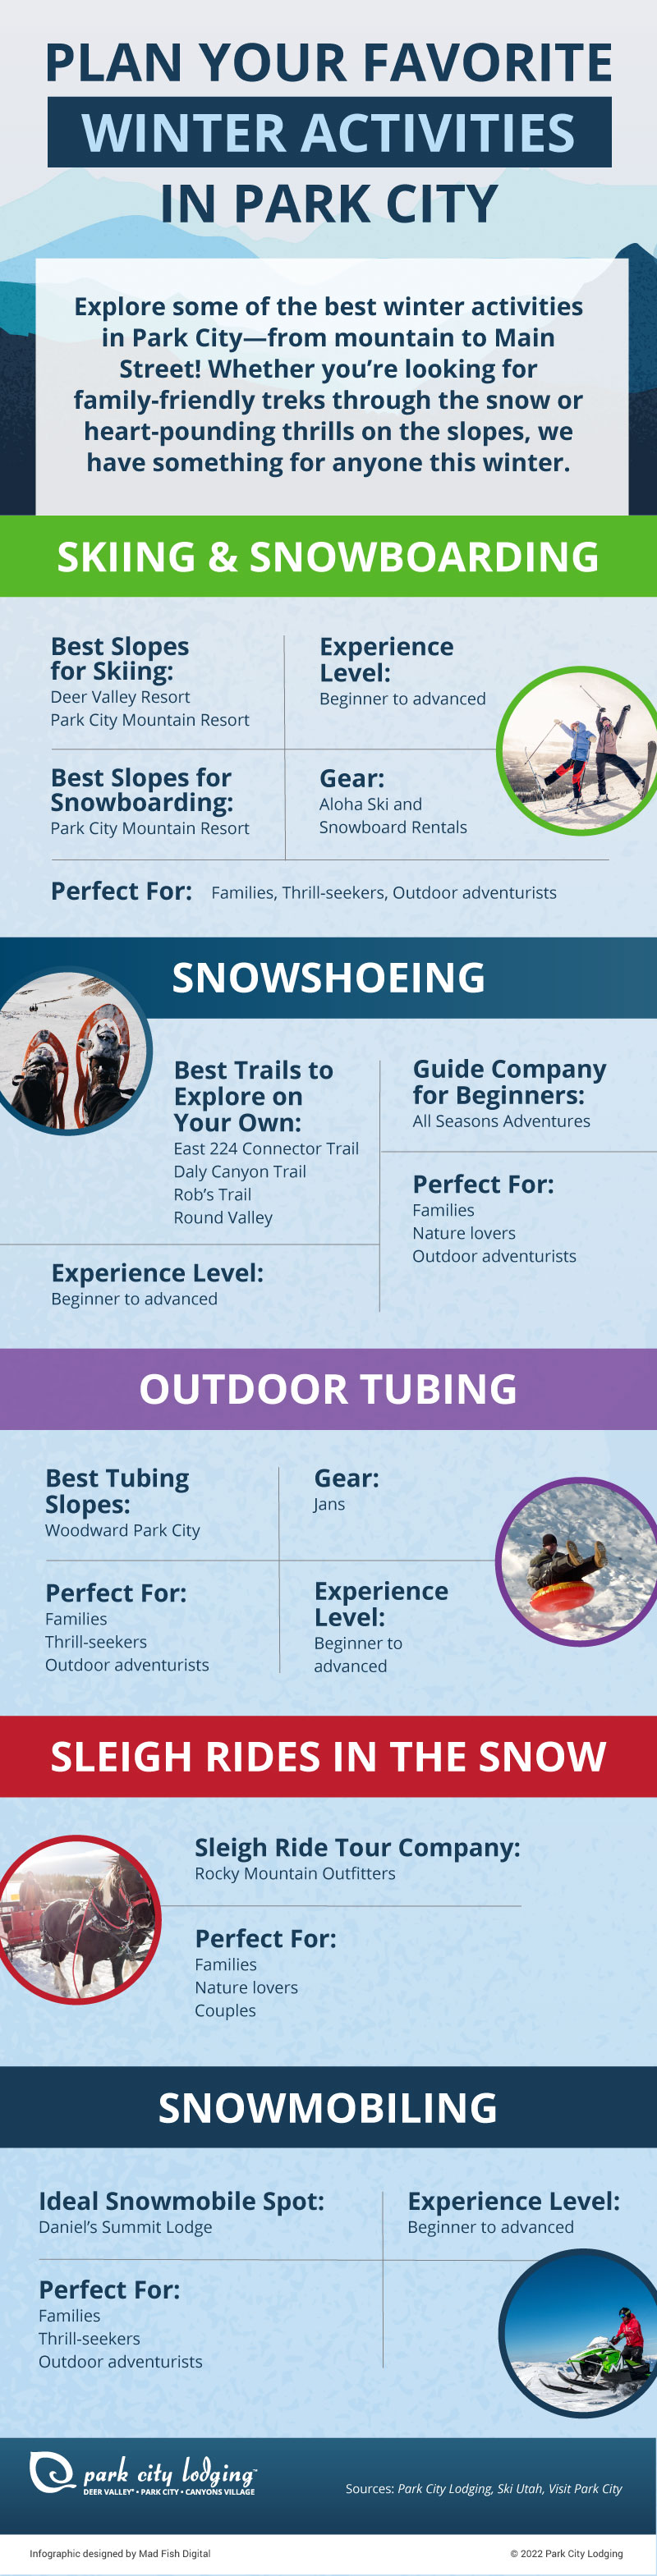 Infographic sharing winter activities in Park City.